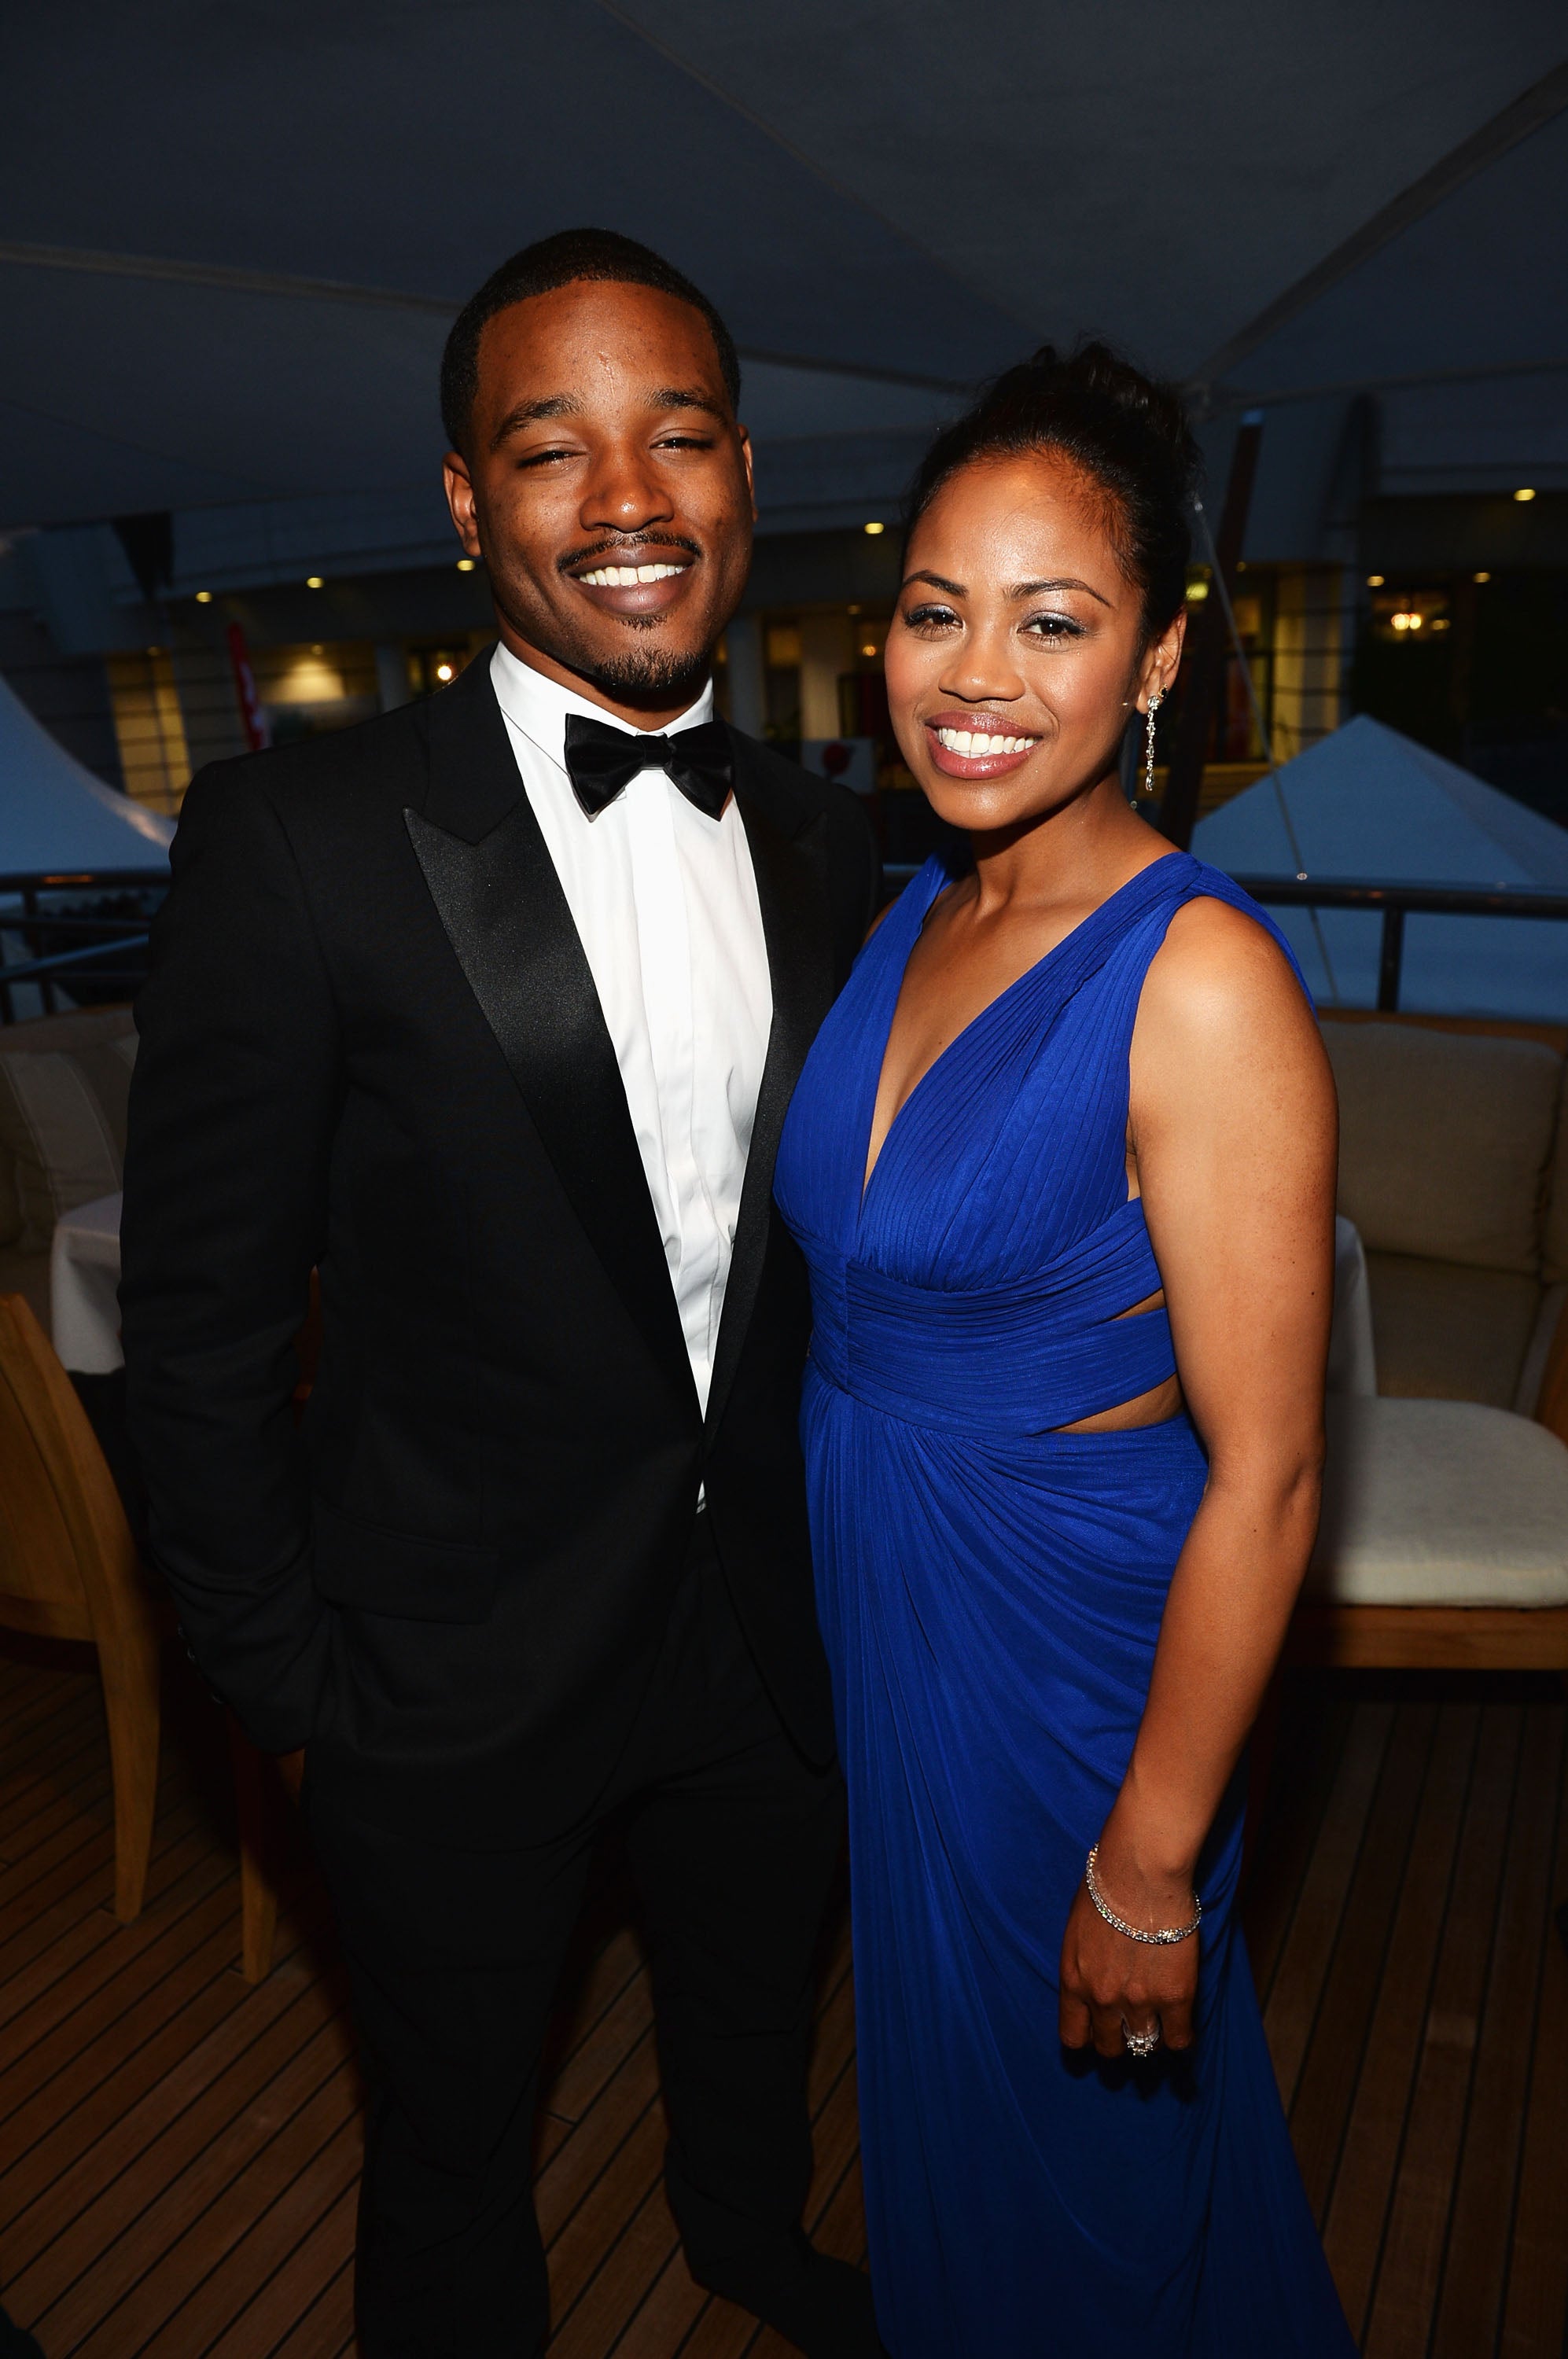 10 Adorable Photos Of 'Black Panther' Director Ryan Coogler And Wife Zinzi Evans That Will Make You Feel The Love
